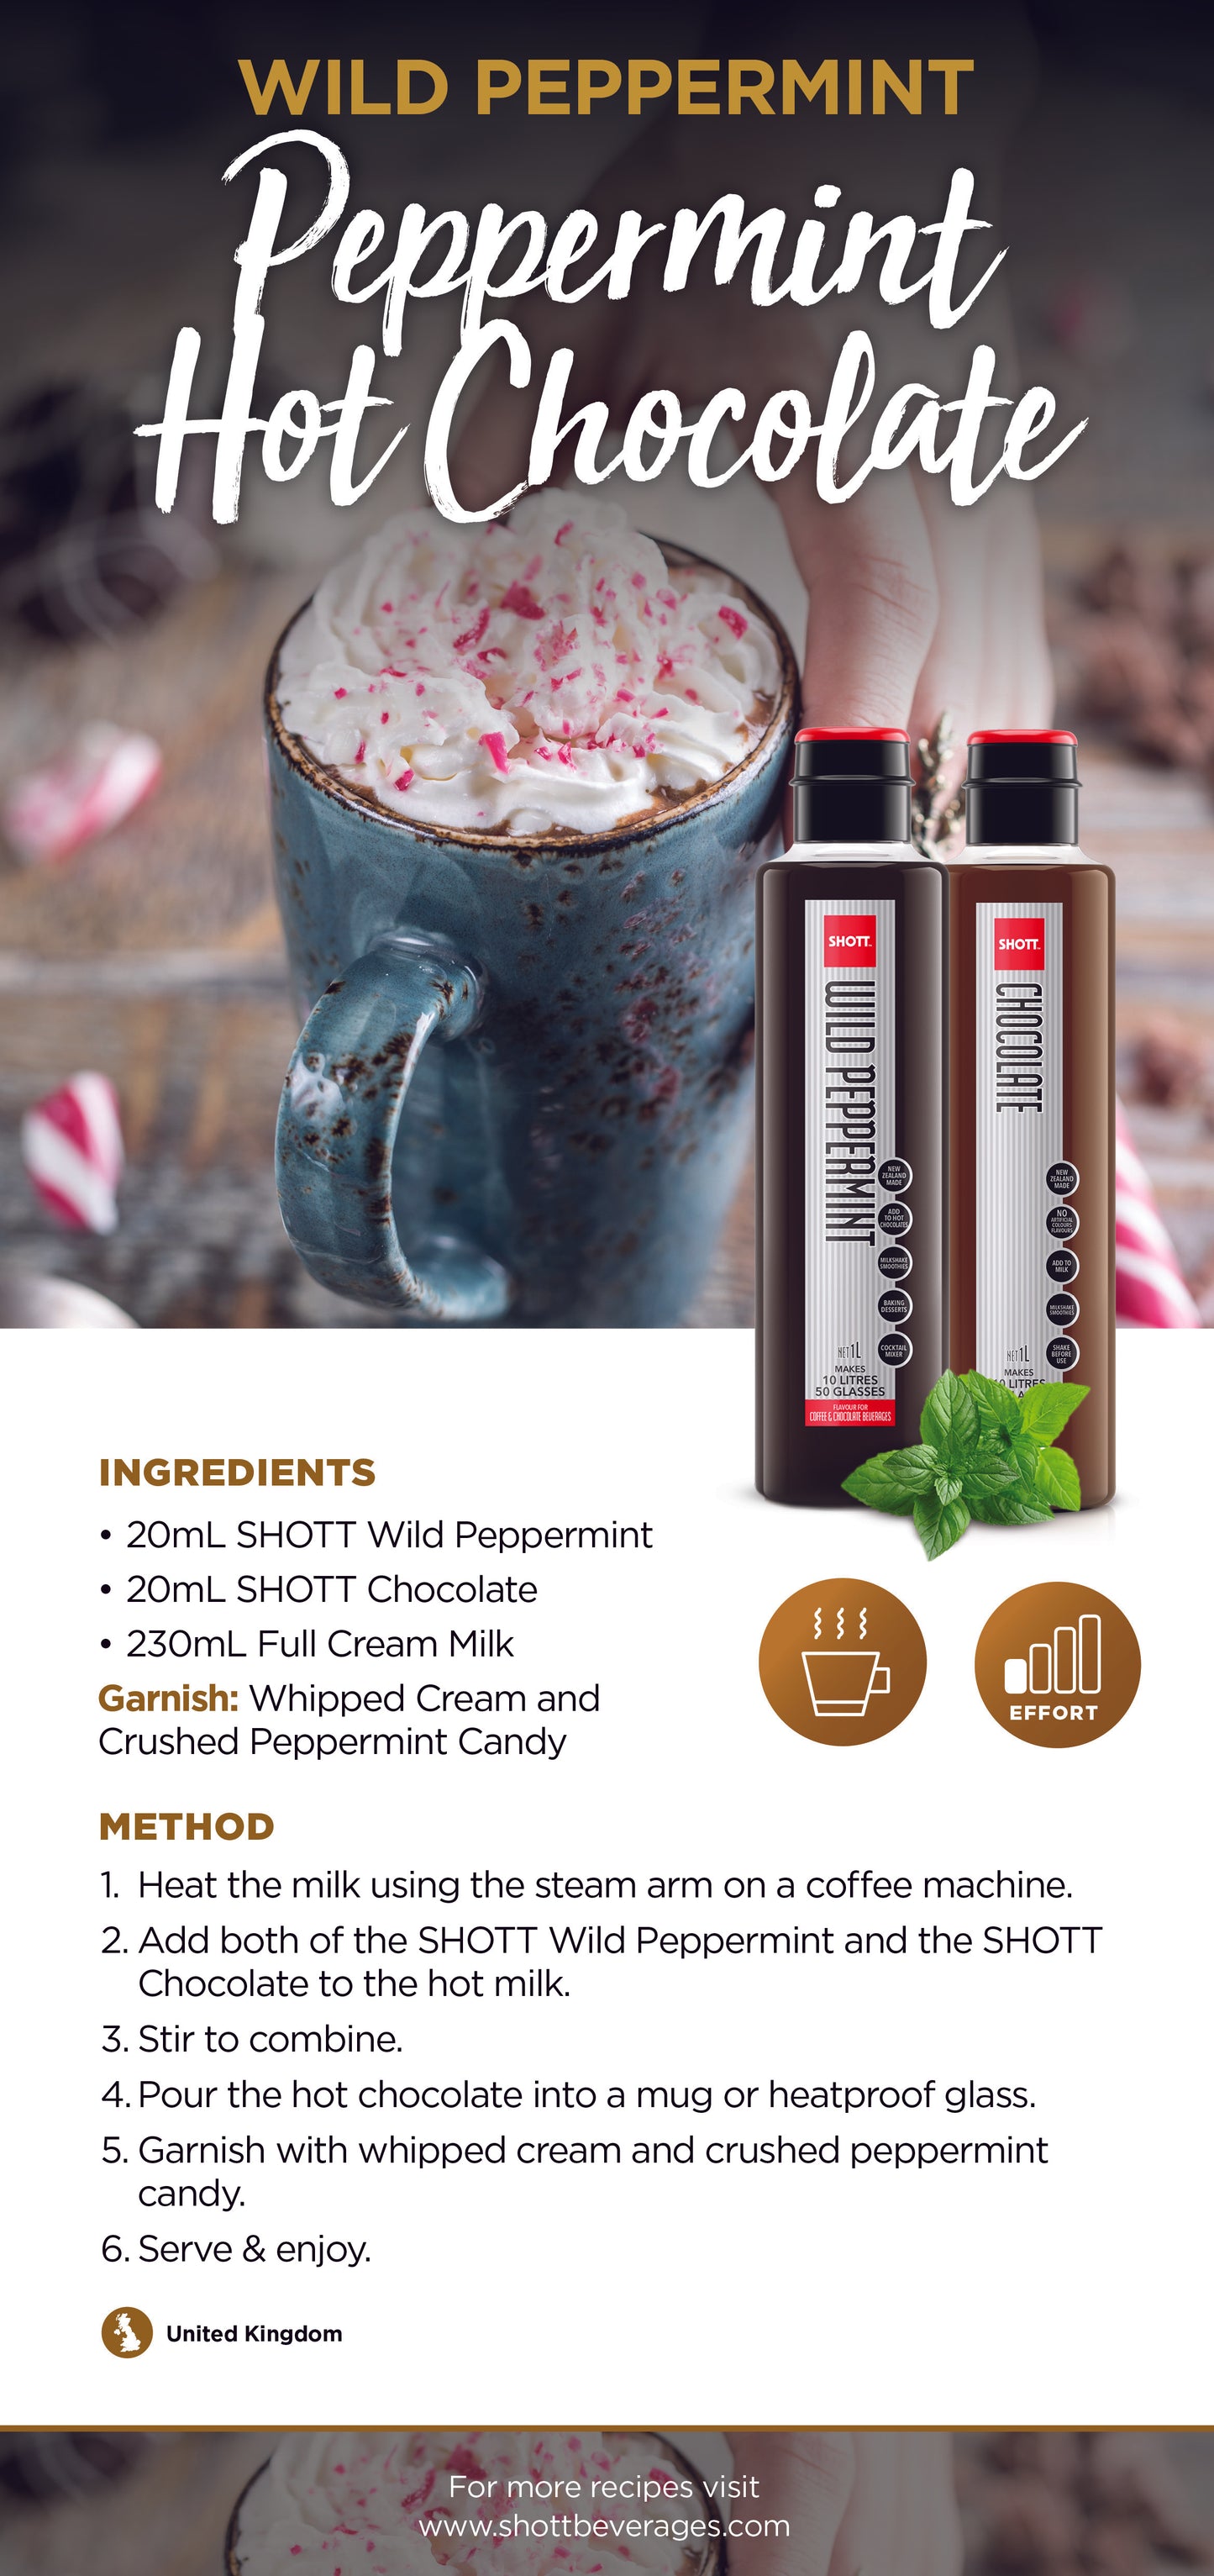 WILD PEPPERMINT SYRUP